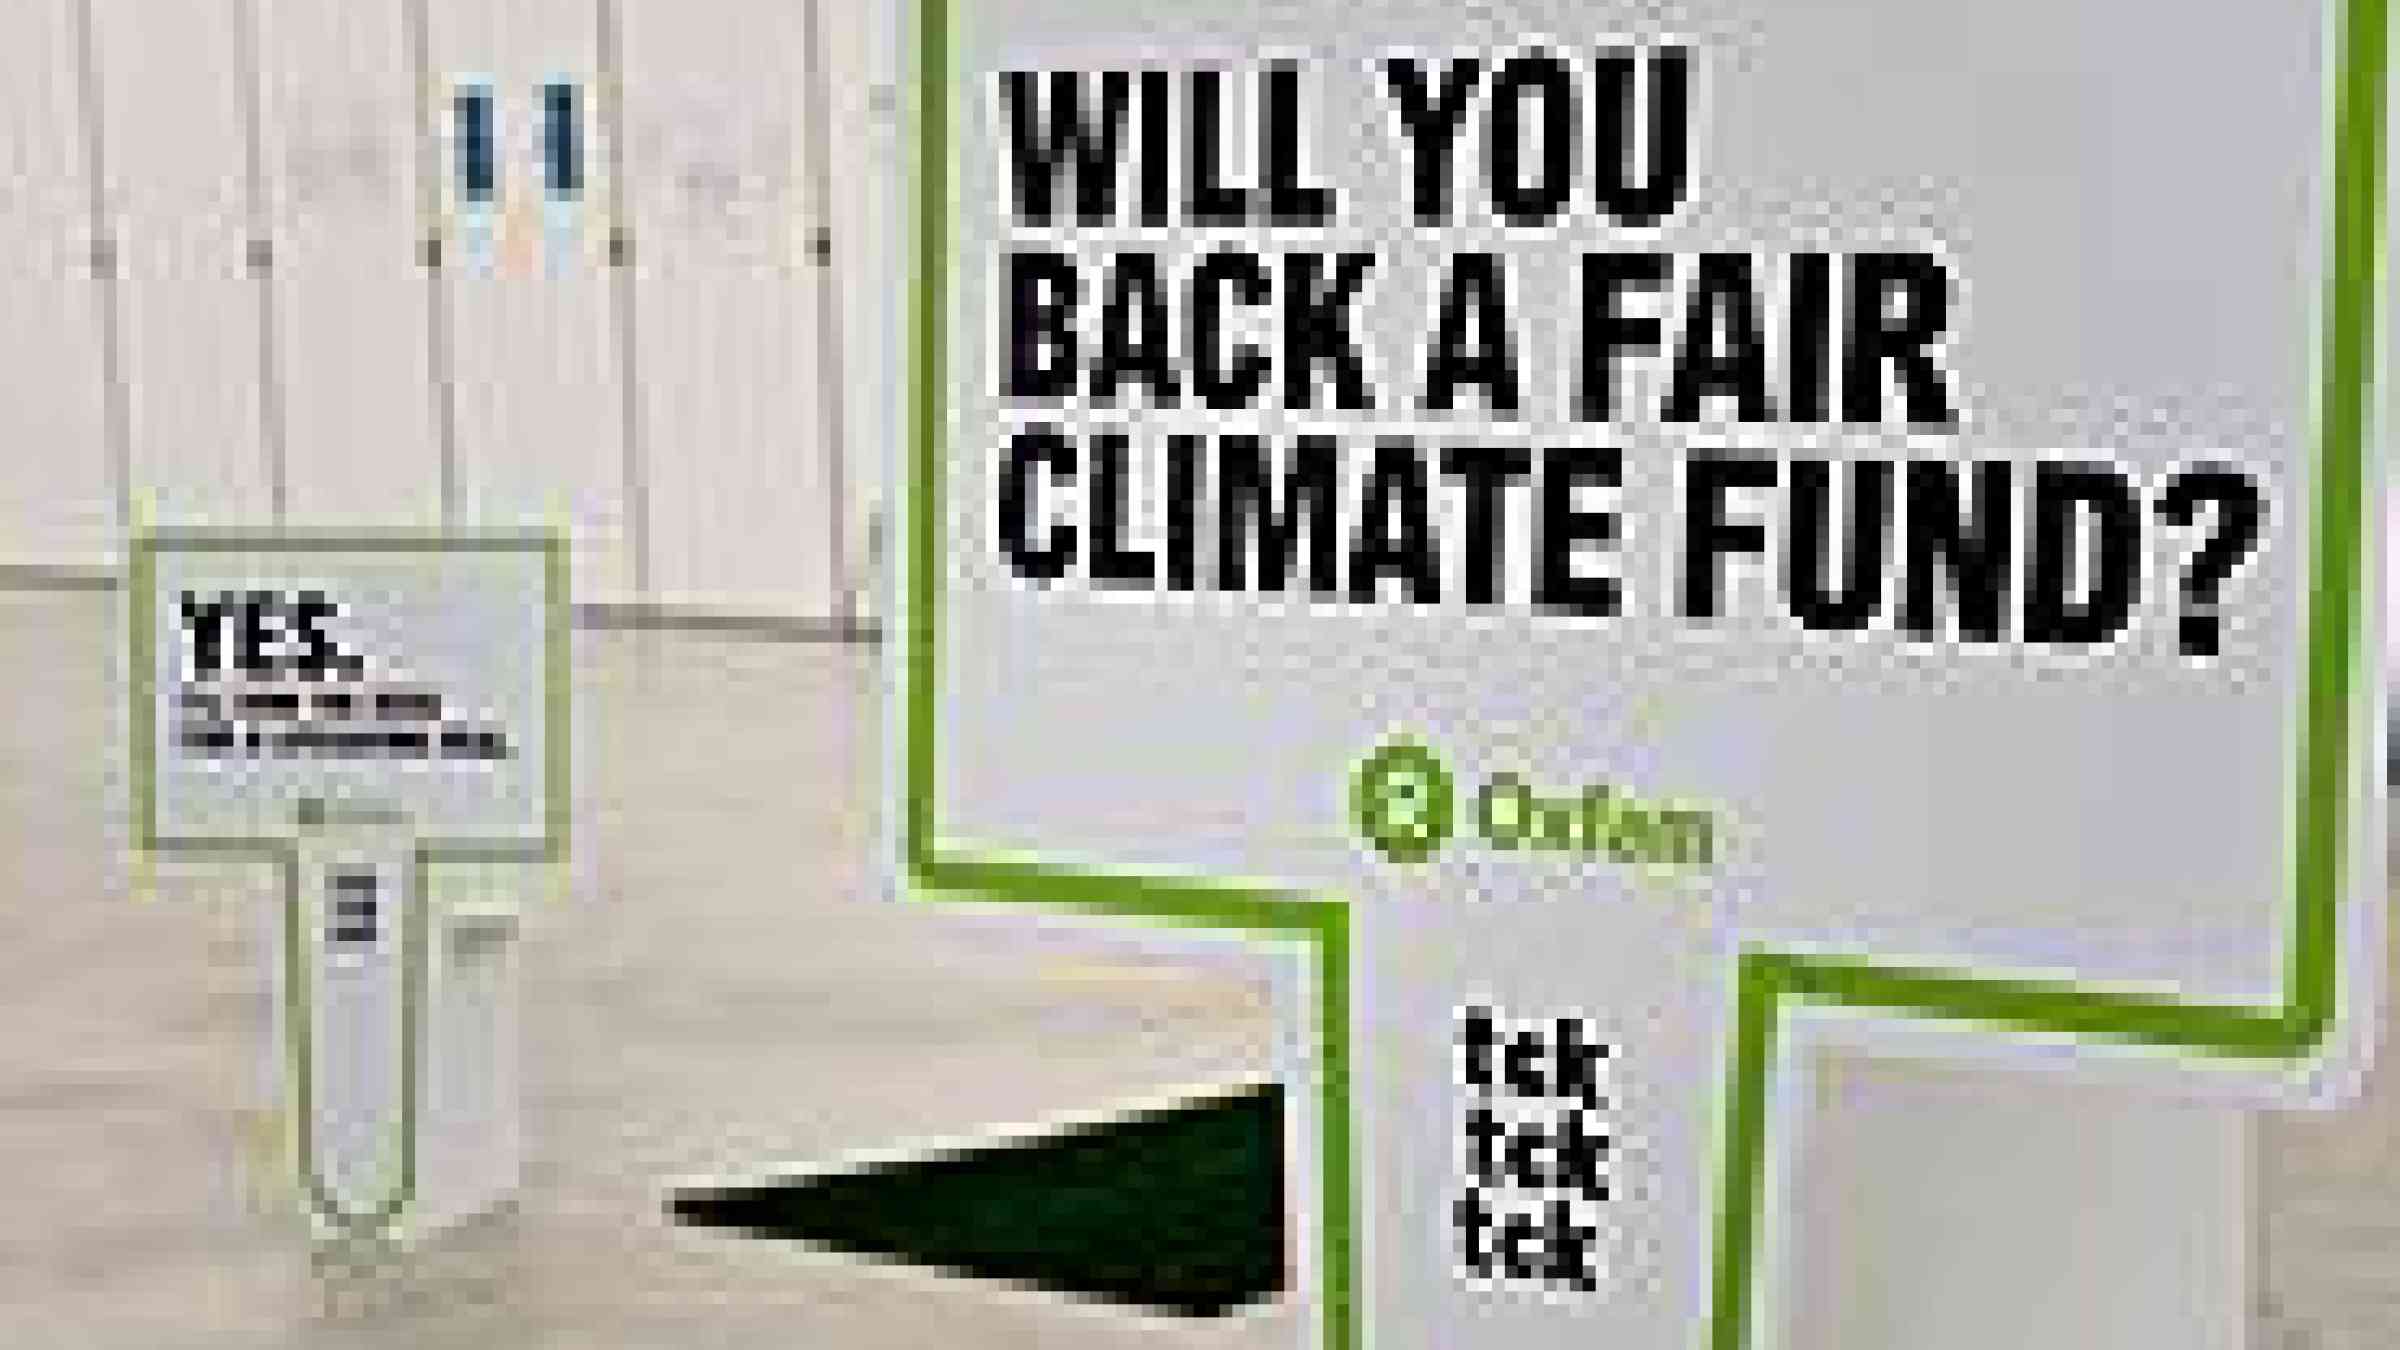 by Flickr user Oxfam International, Creative Commons BY-NC-ND 2.0, http://www.flickr.com/photos/oxfam/5224191834/